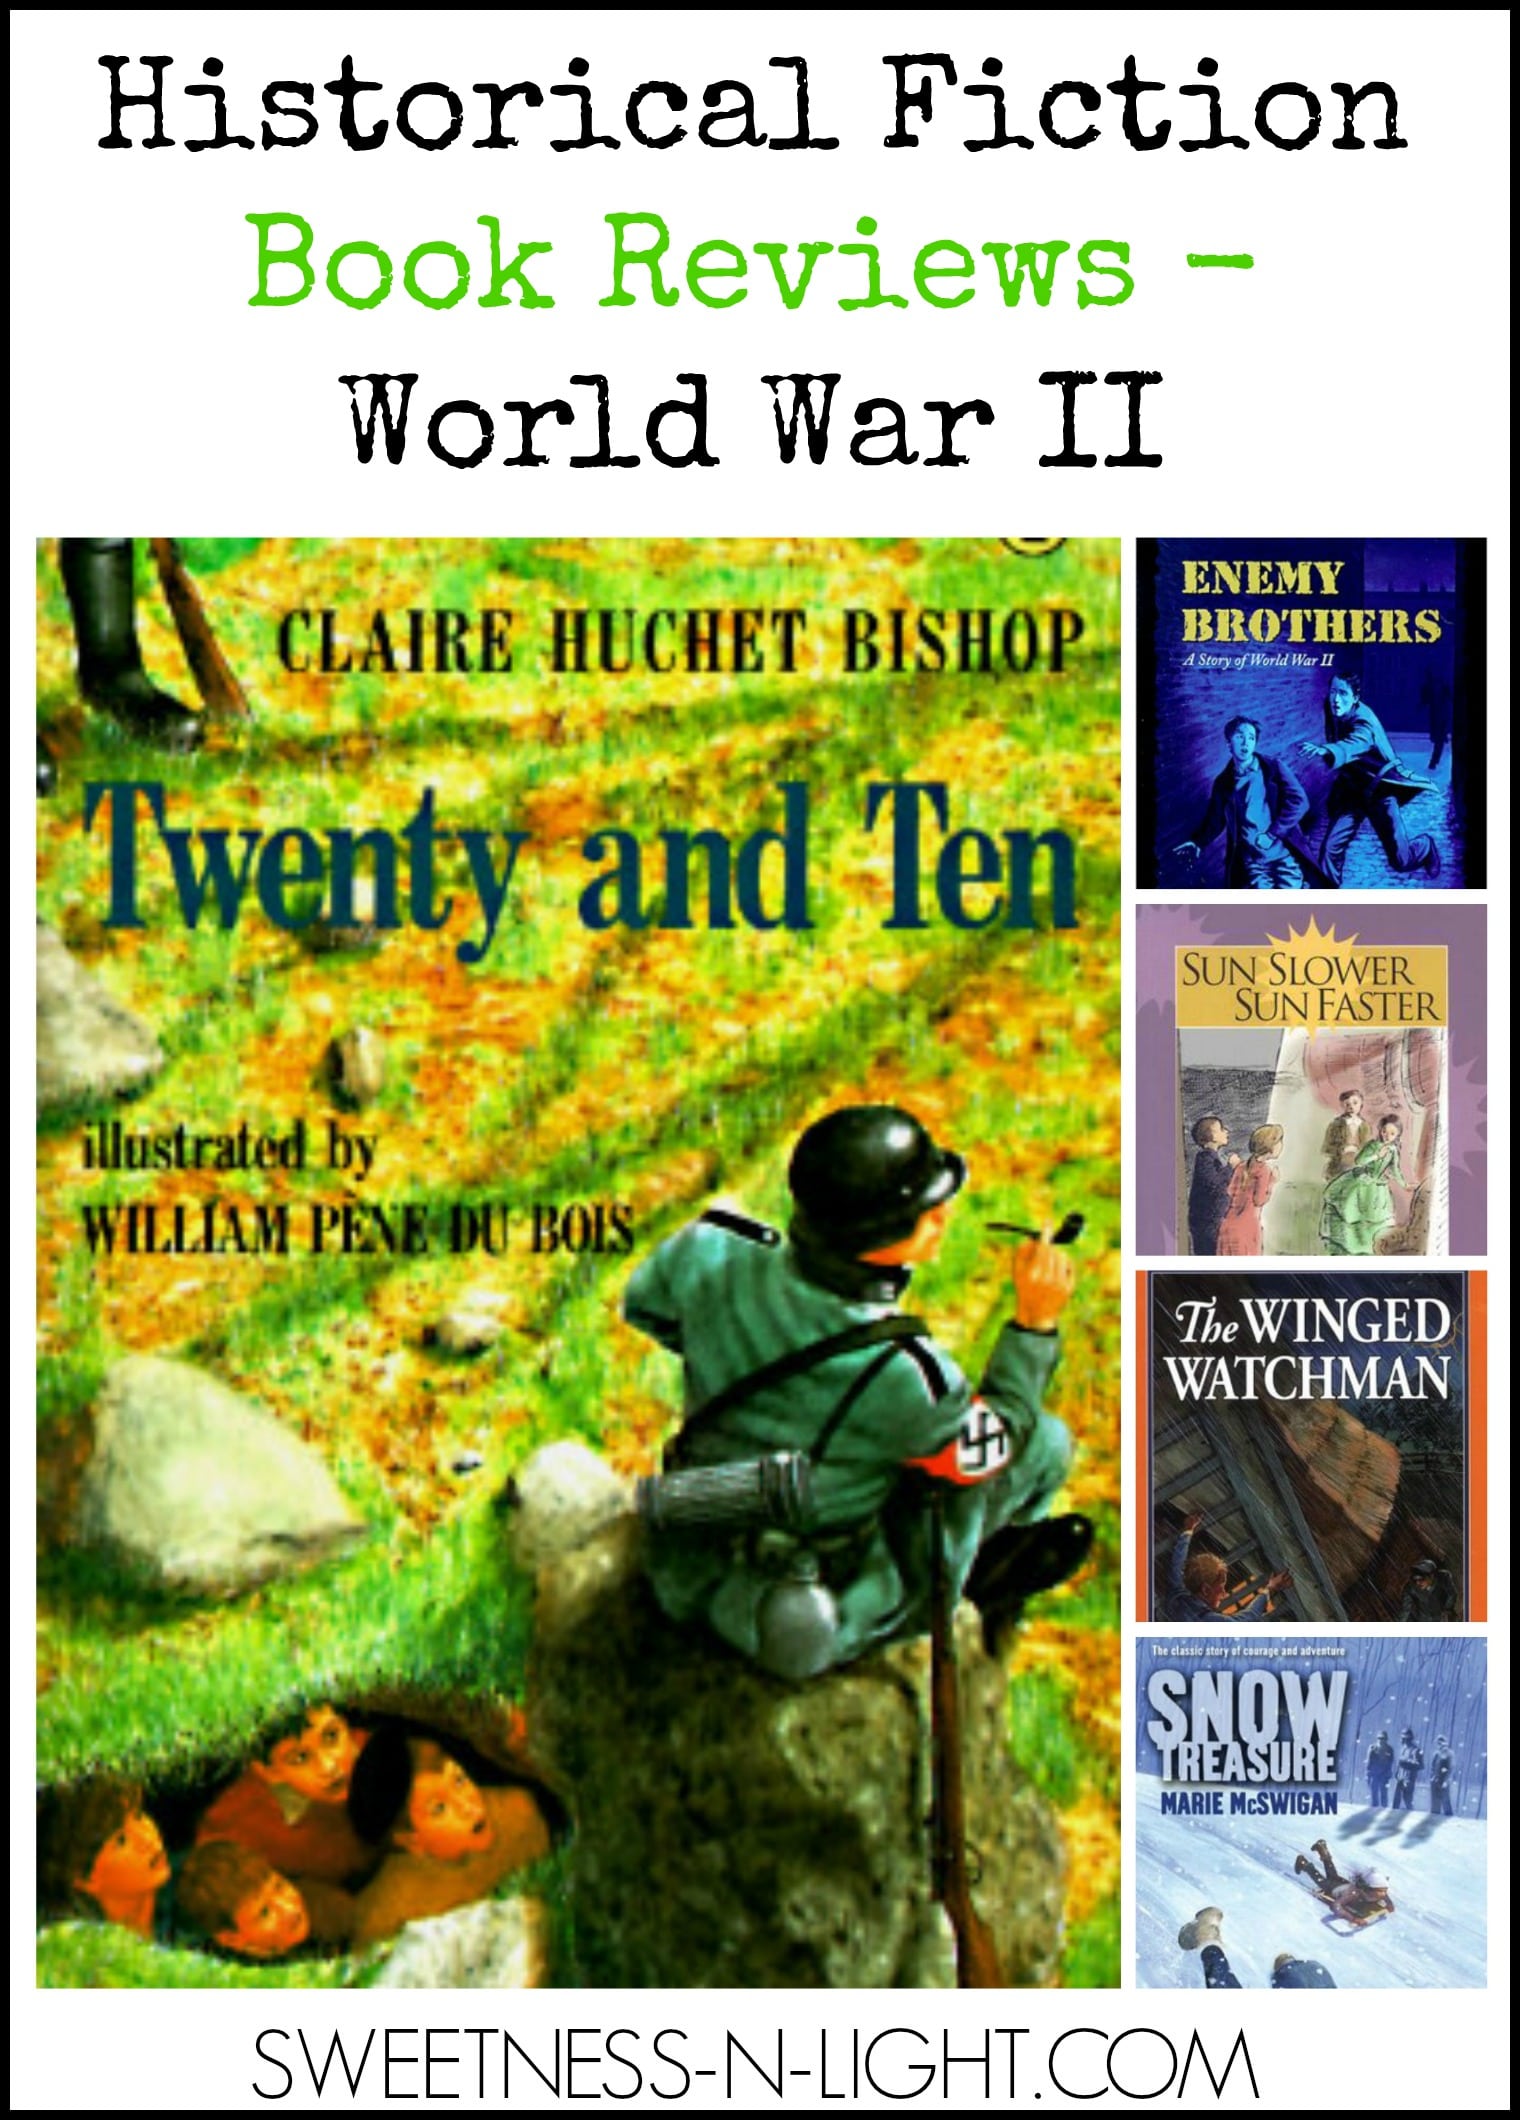 Our Favorite Historical Fiction World War II Book Reviews